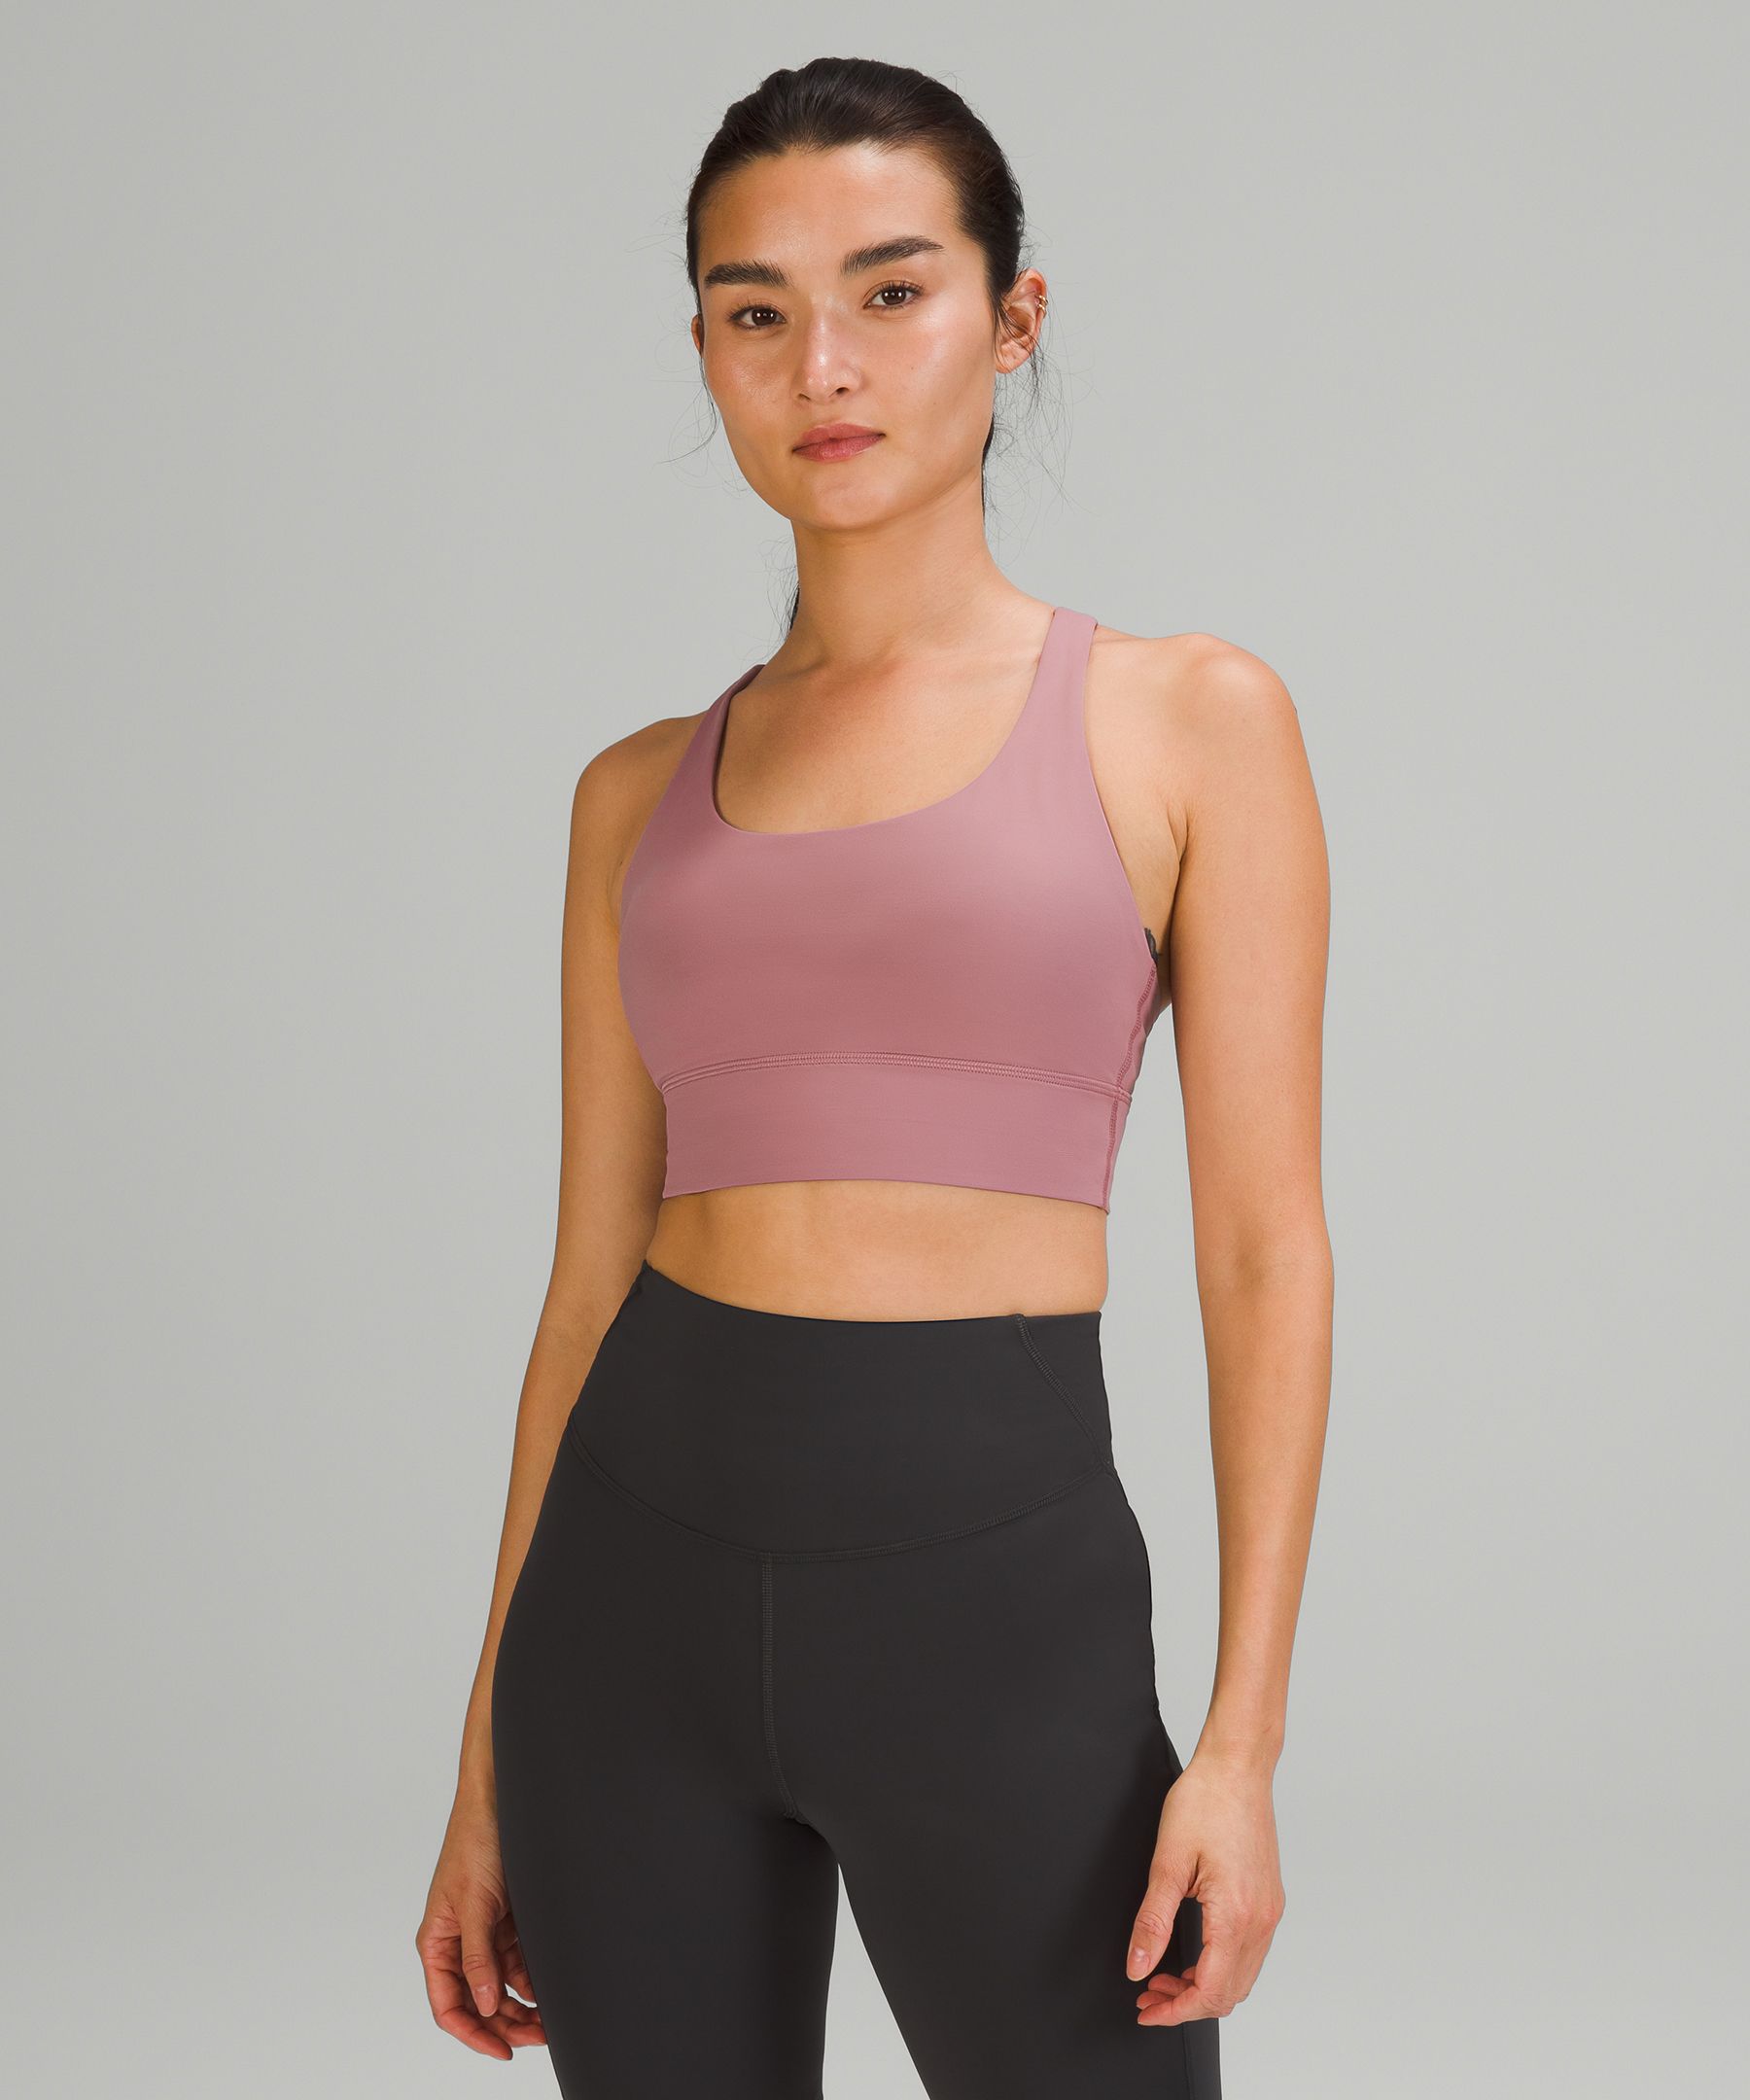 Align Tank in size 8 (Pink Taupe) - Should I keep it or return it